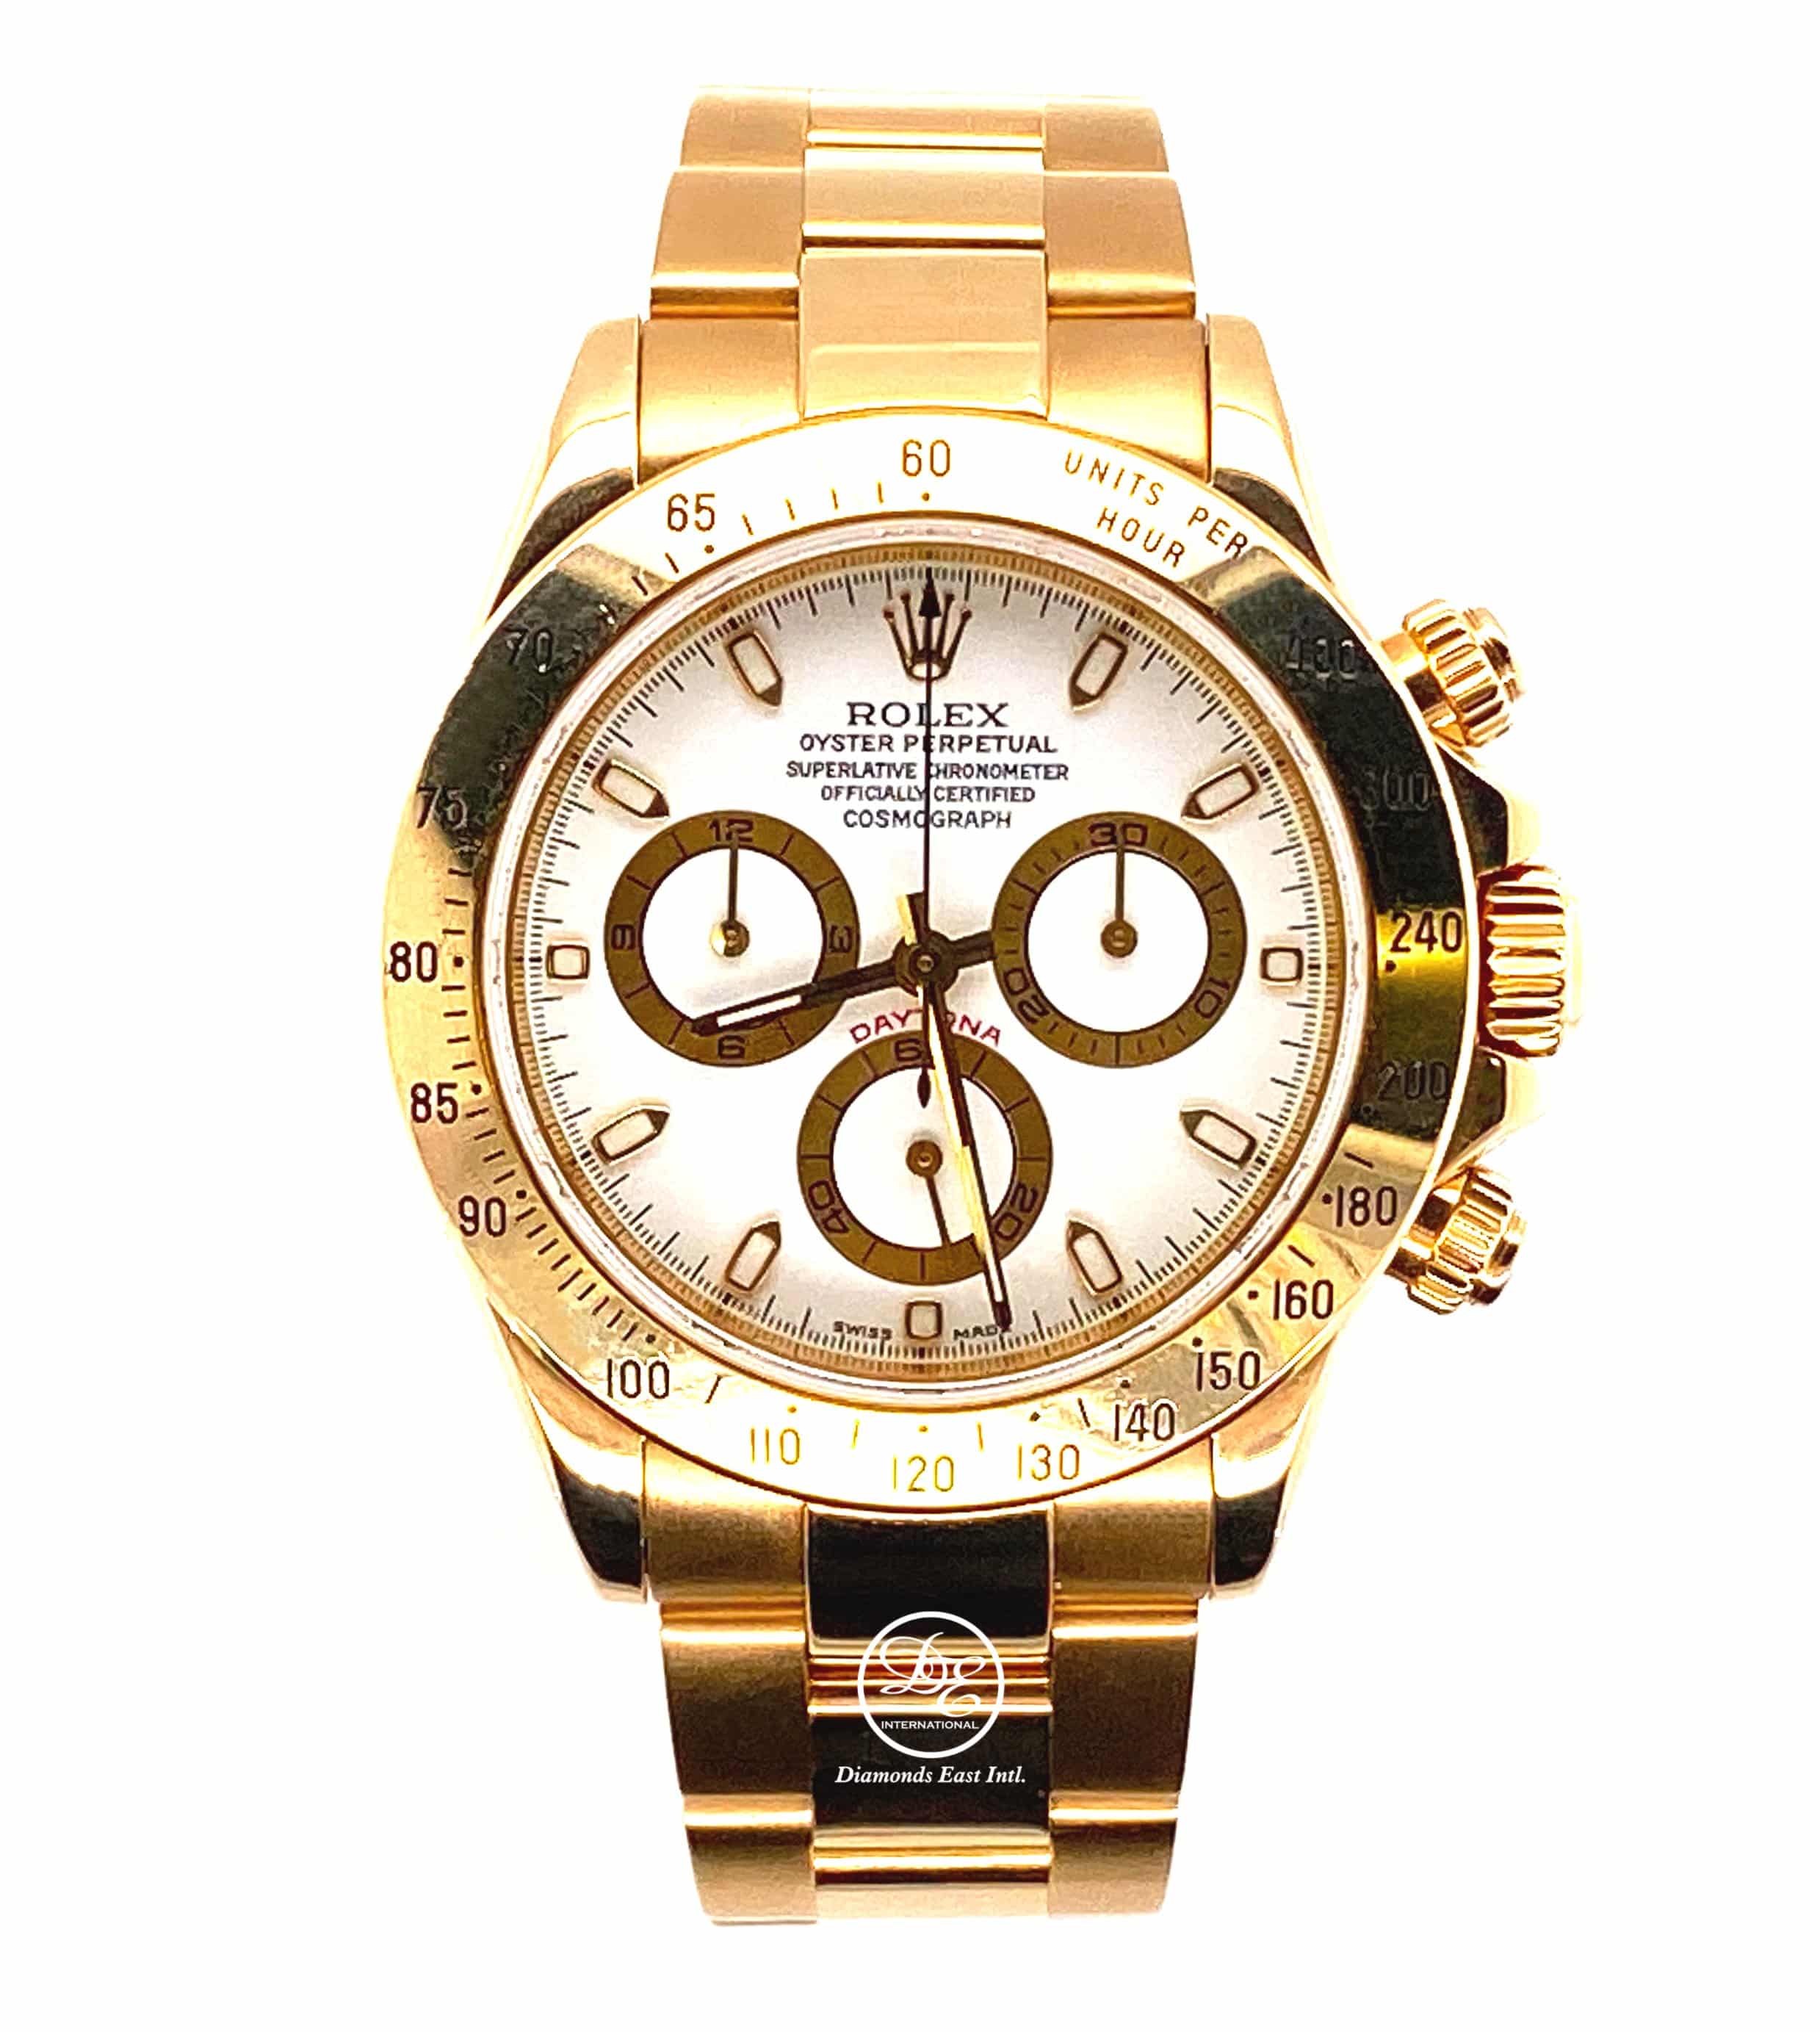 Rolex 116528 18K Yellow Gold White Dial Perpetual Cosmograph Watch Diamonds East Intl.